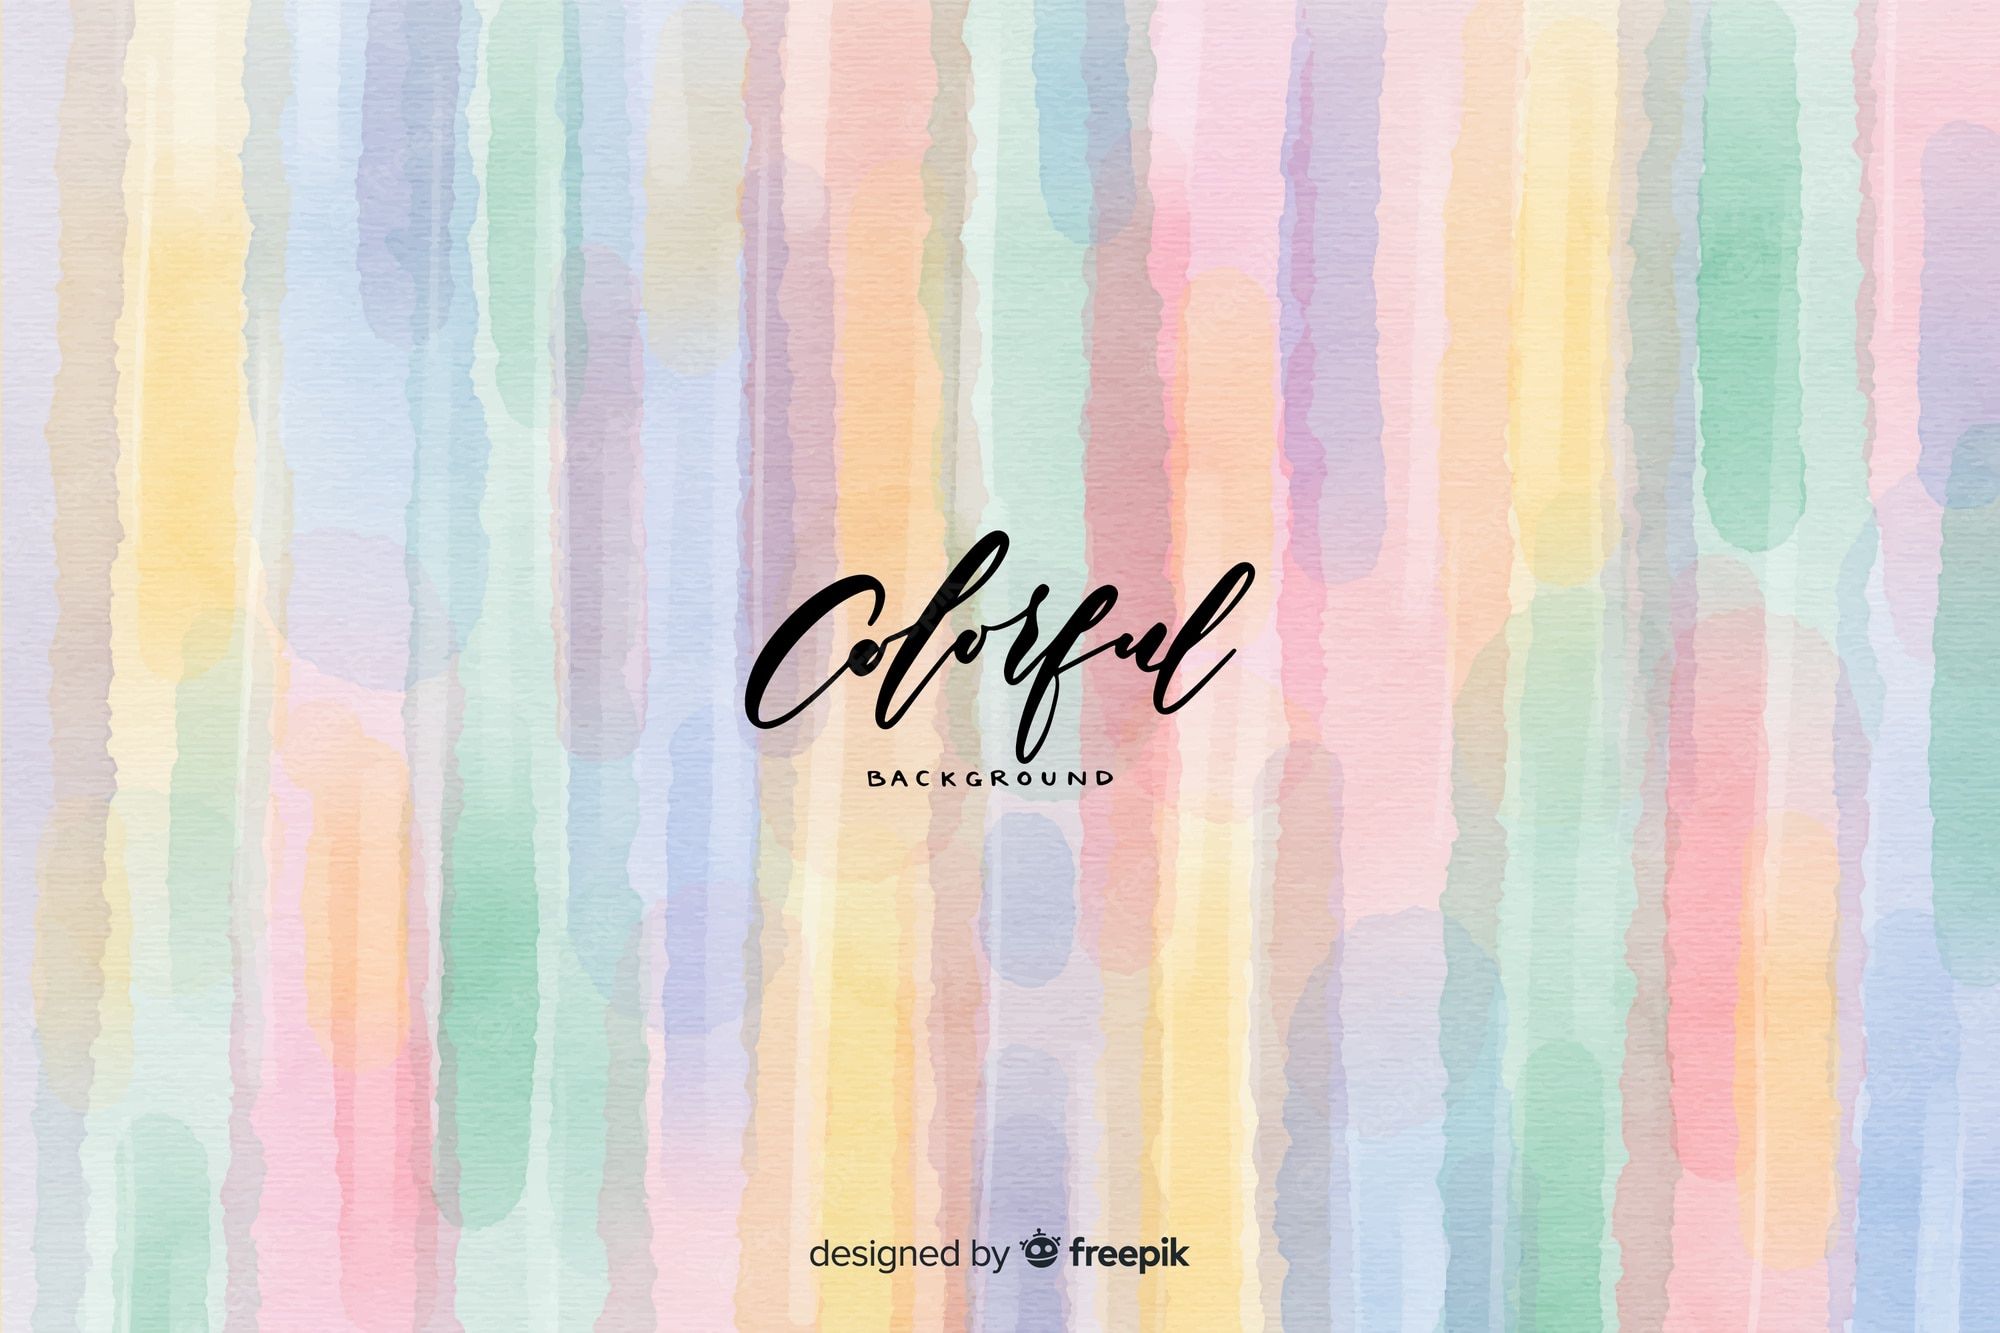 A colorful watercolor background with brush strokes - Blush